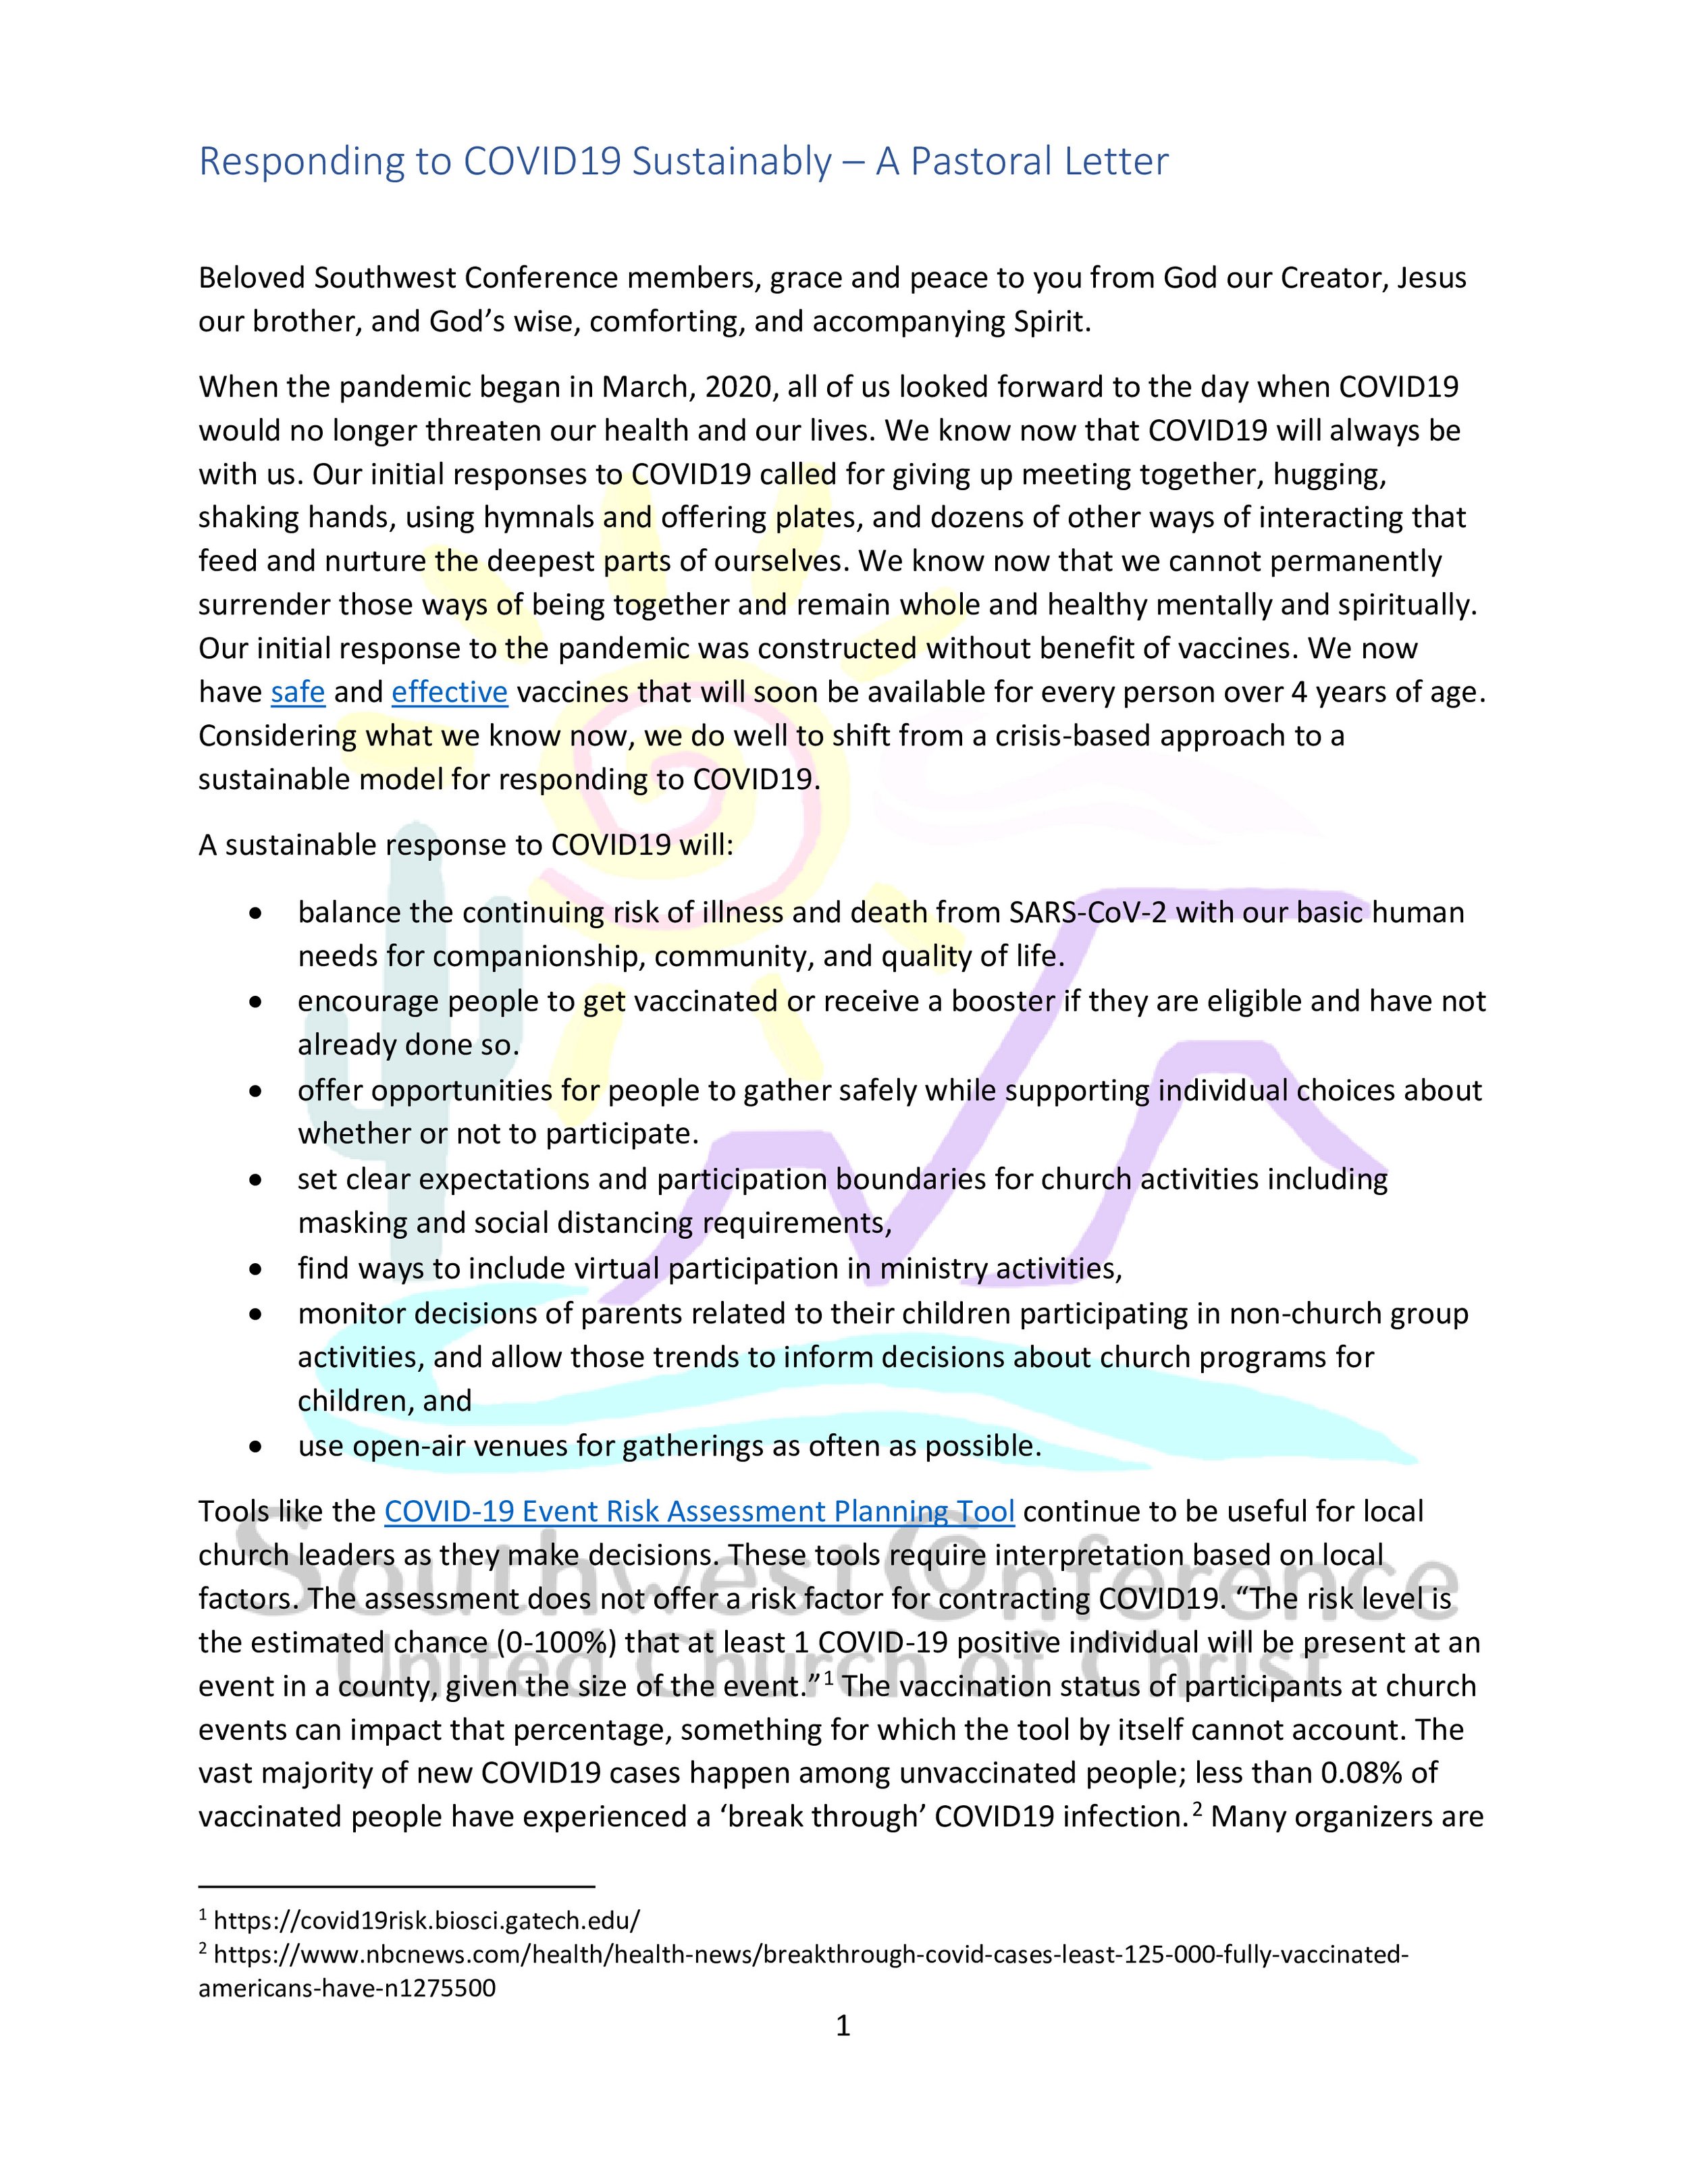 Sustainable Response to COVID19 - a pastoral letter page 1.jpg